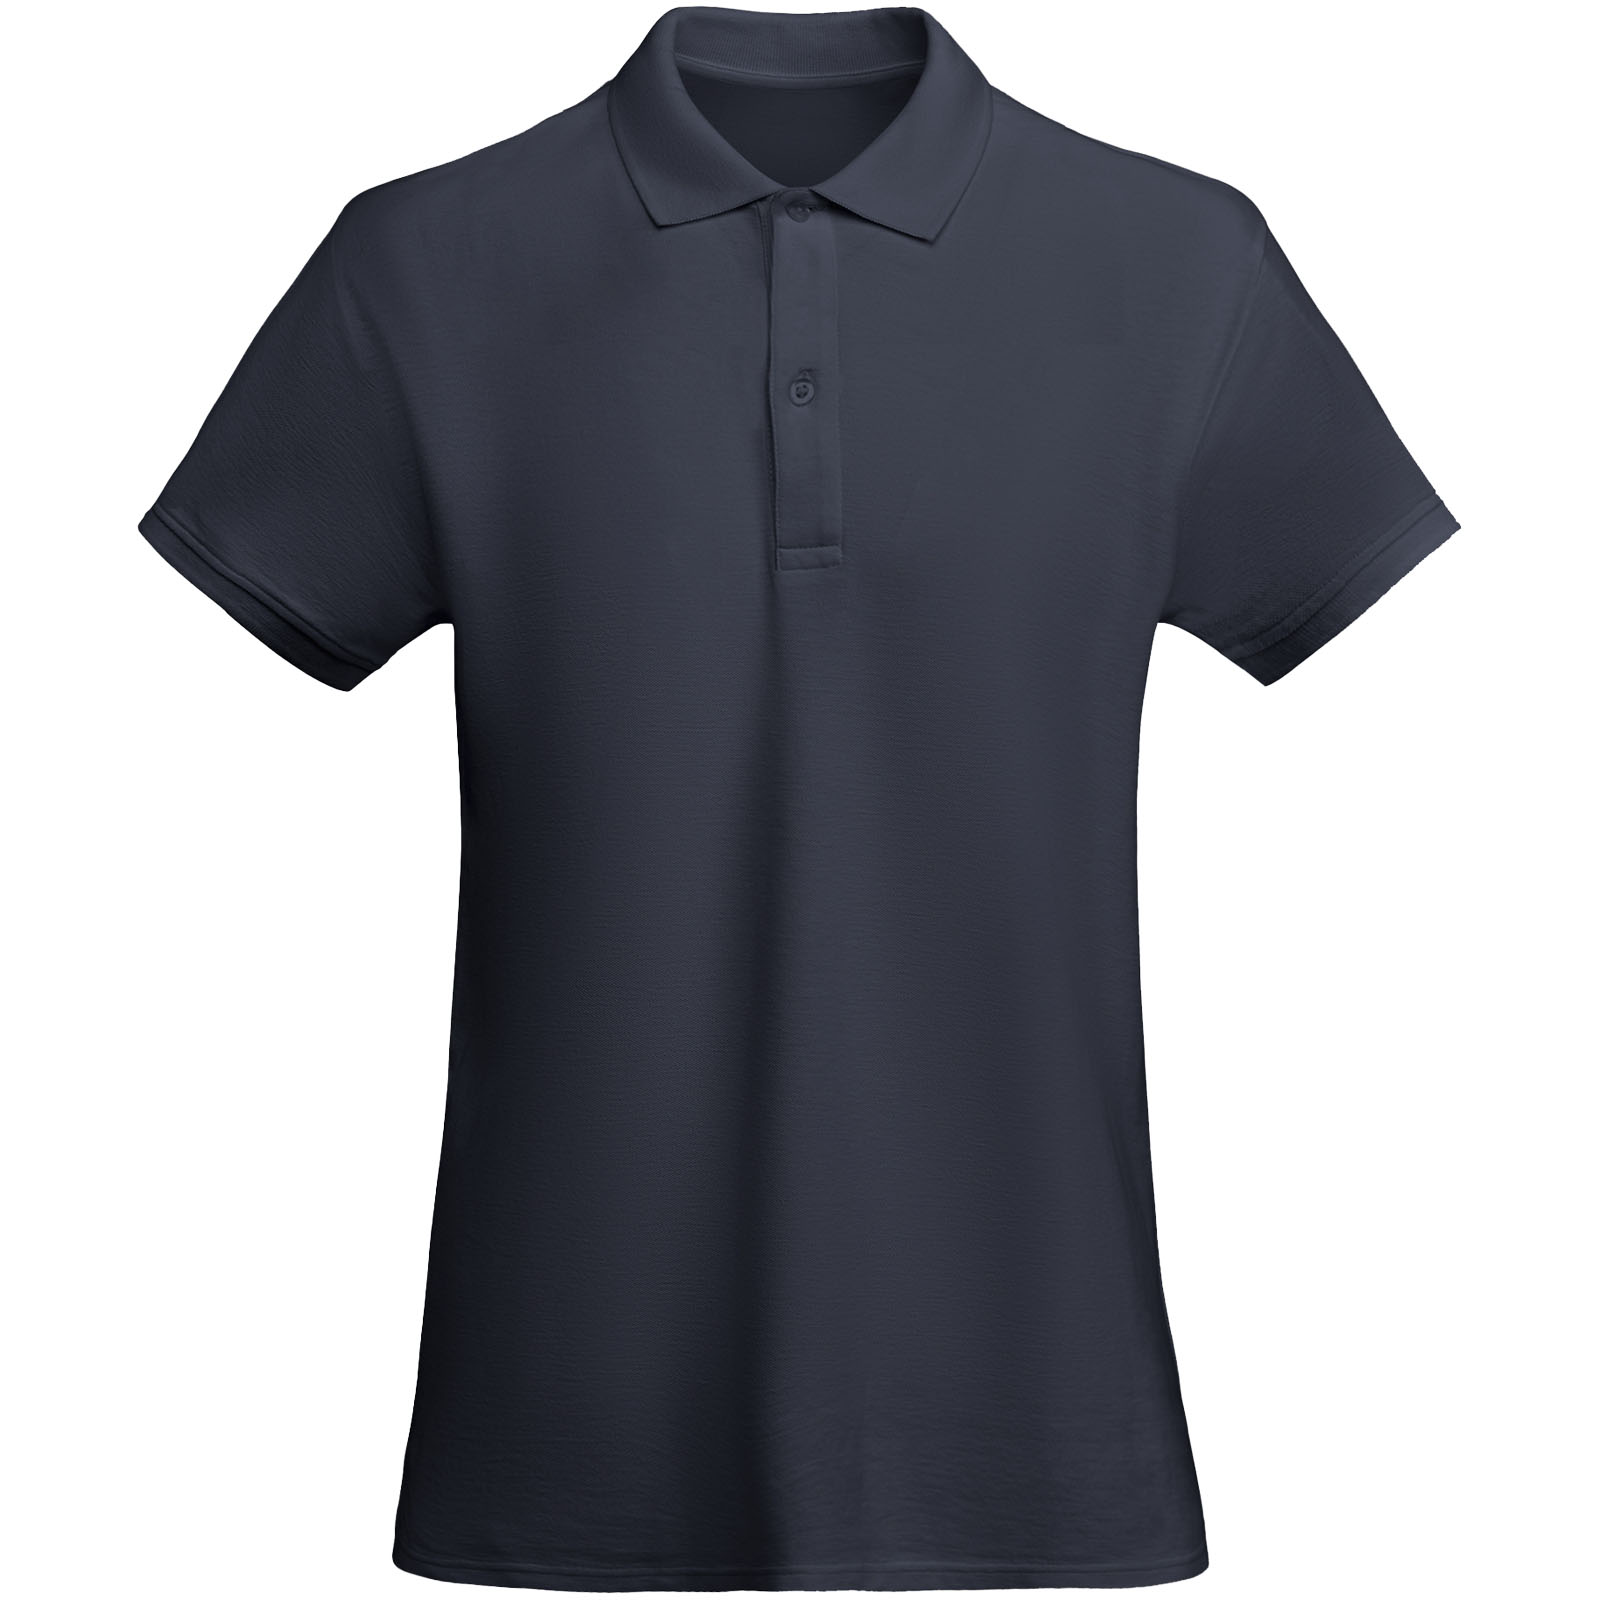 Advertising T-shirts - Prince short sleeve women's polo